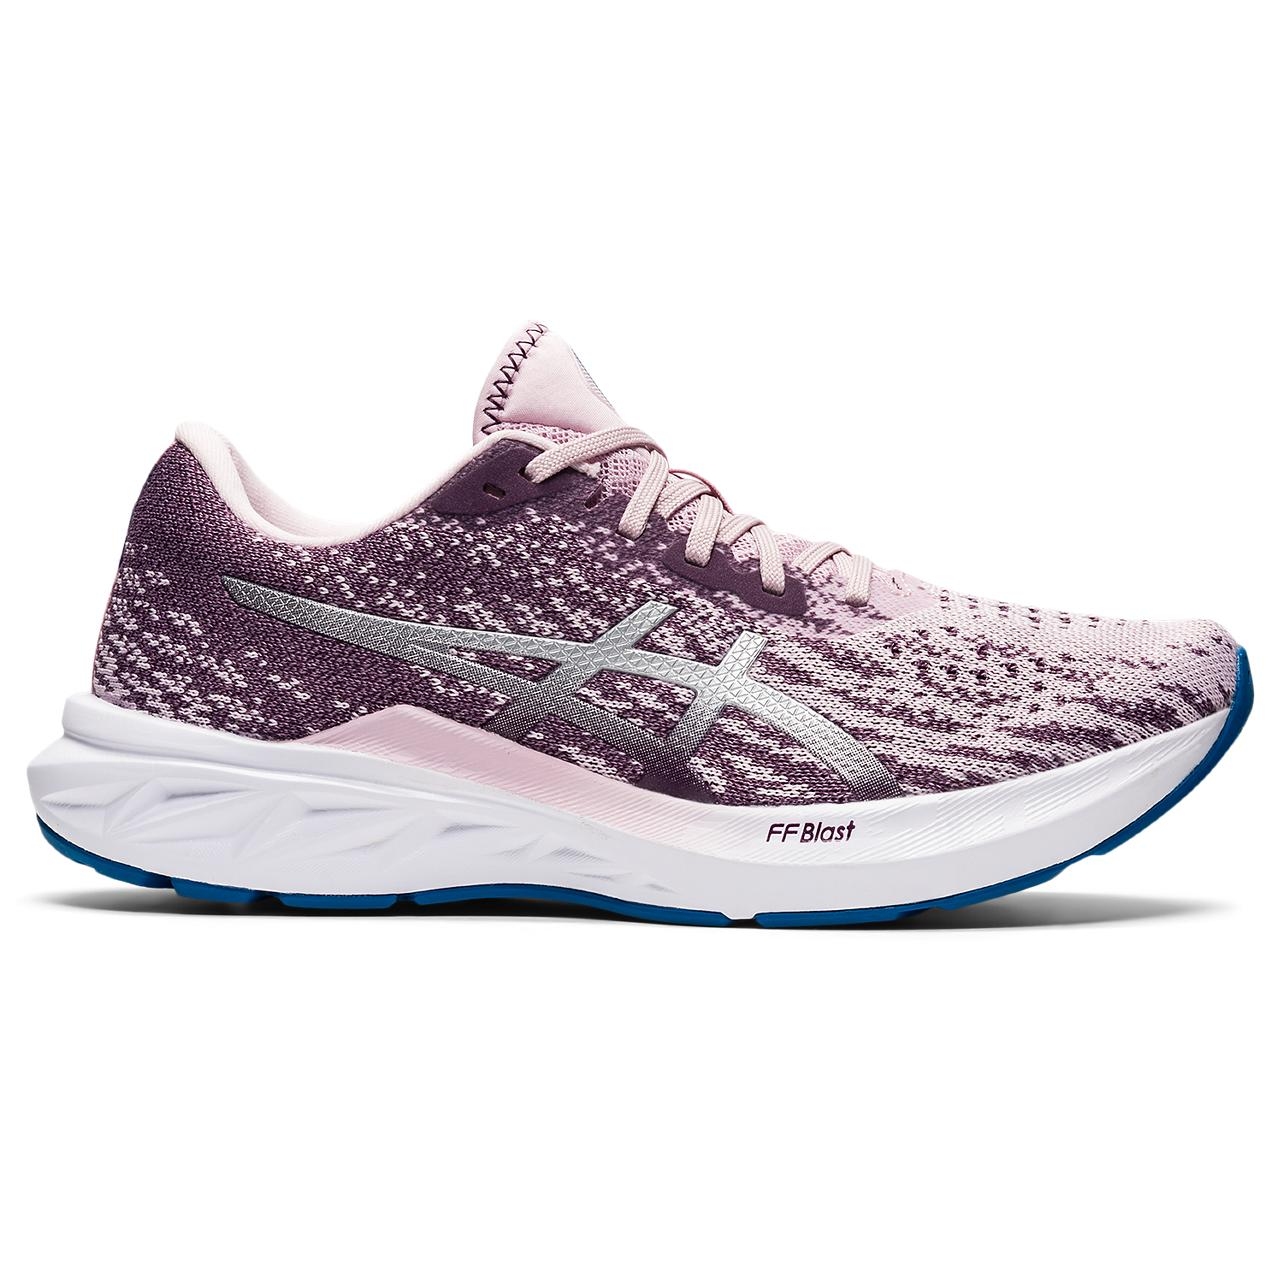 Image of asics Dynablast 2 Women's Running Shoe - barely rose/pure silver